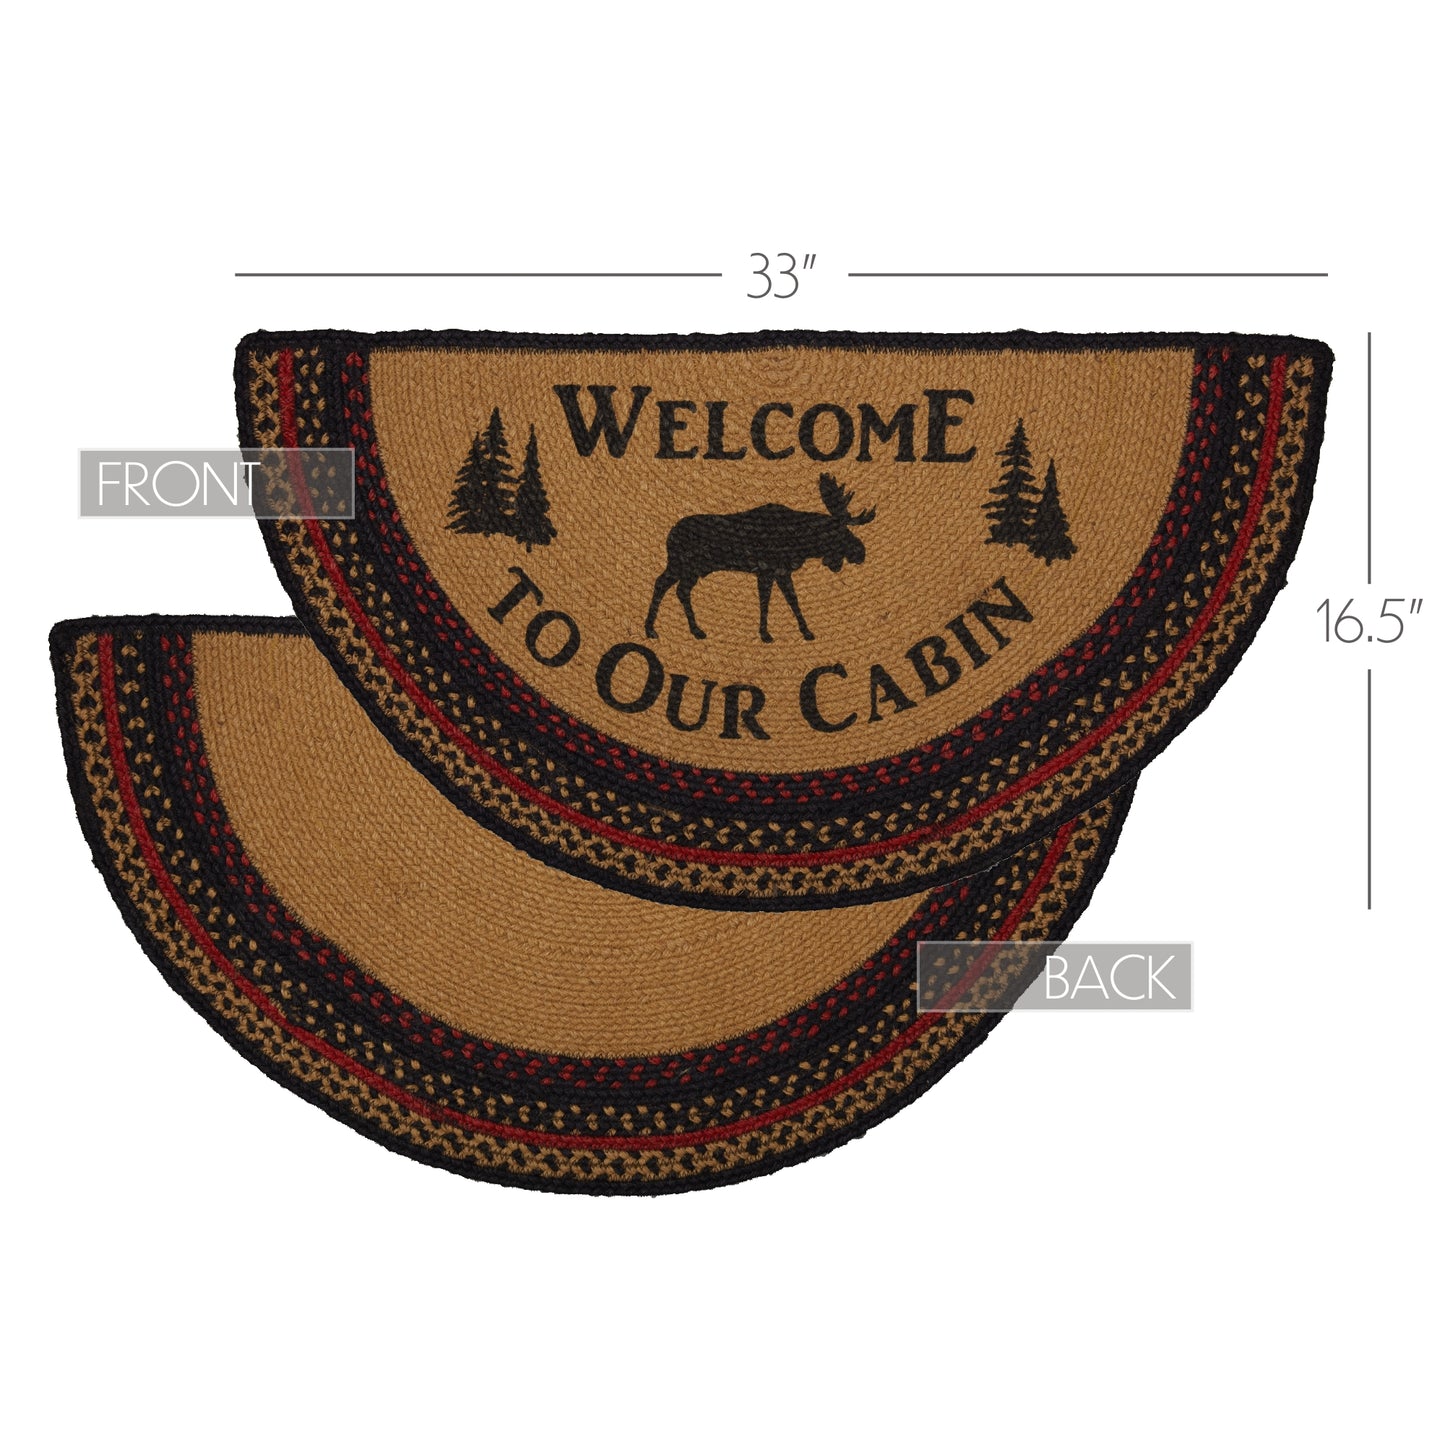 70193-Cumberland-Stenciled-Moose-Jute-Rug-Half-Circle-Welcome-to-the-Cabin-w-Pad-16.5x33-image-9